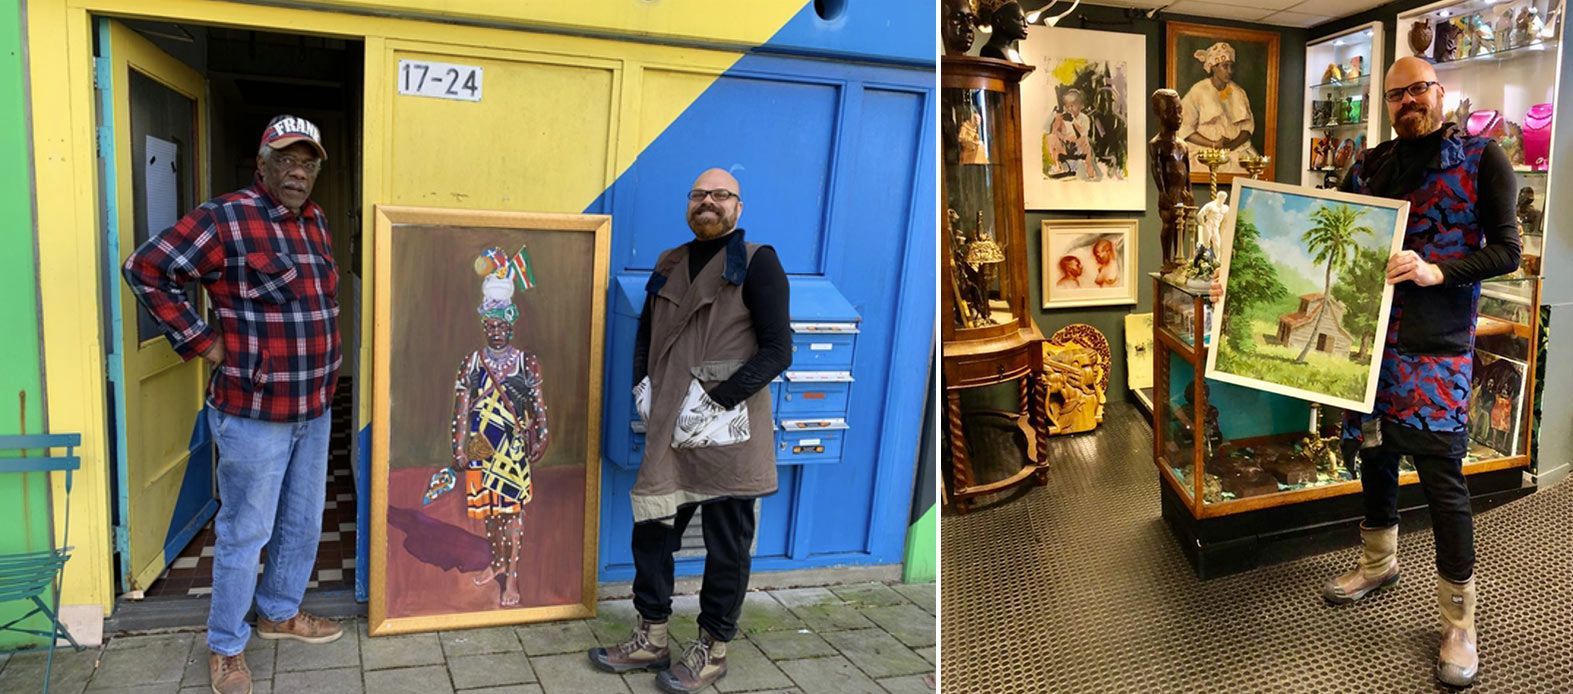 Left: Afro-Surinamese artist Frank Creton (left) and Bart Krieger (right) at the artist’s workshop in Heesterveld (Amstetdam Southeast). Right: Bart Krieger holding an artwork by unknown artist.